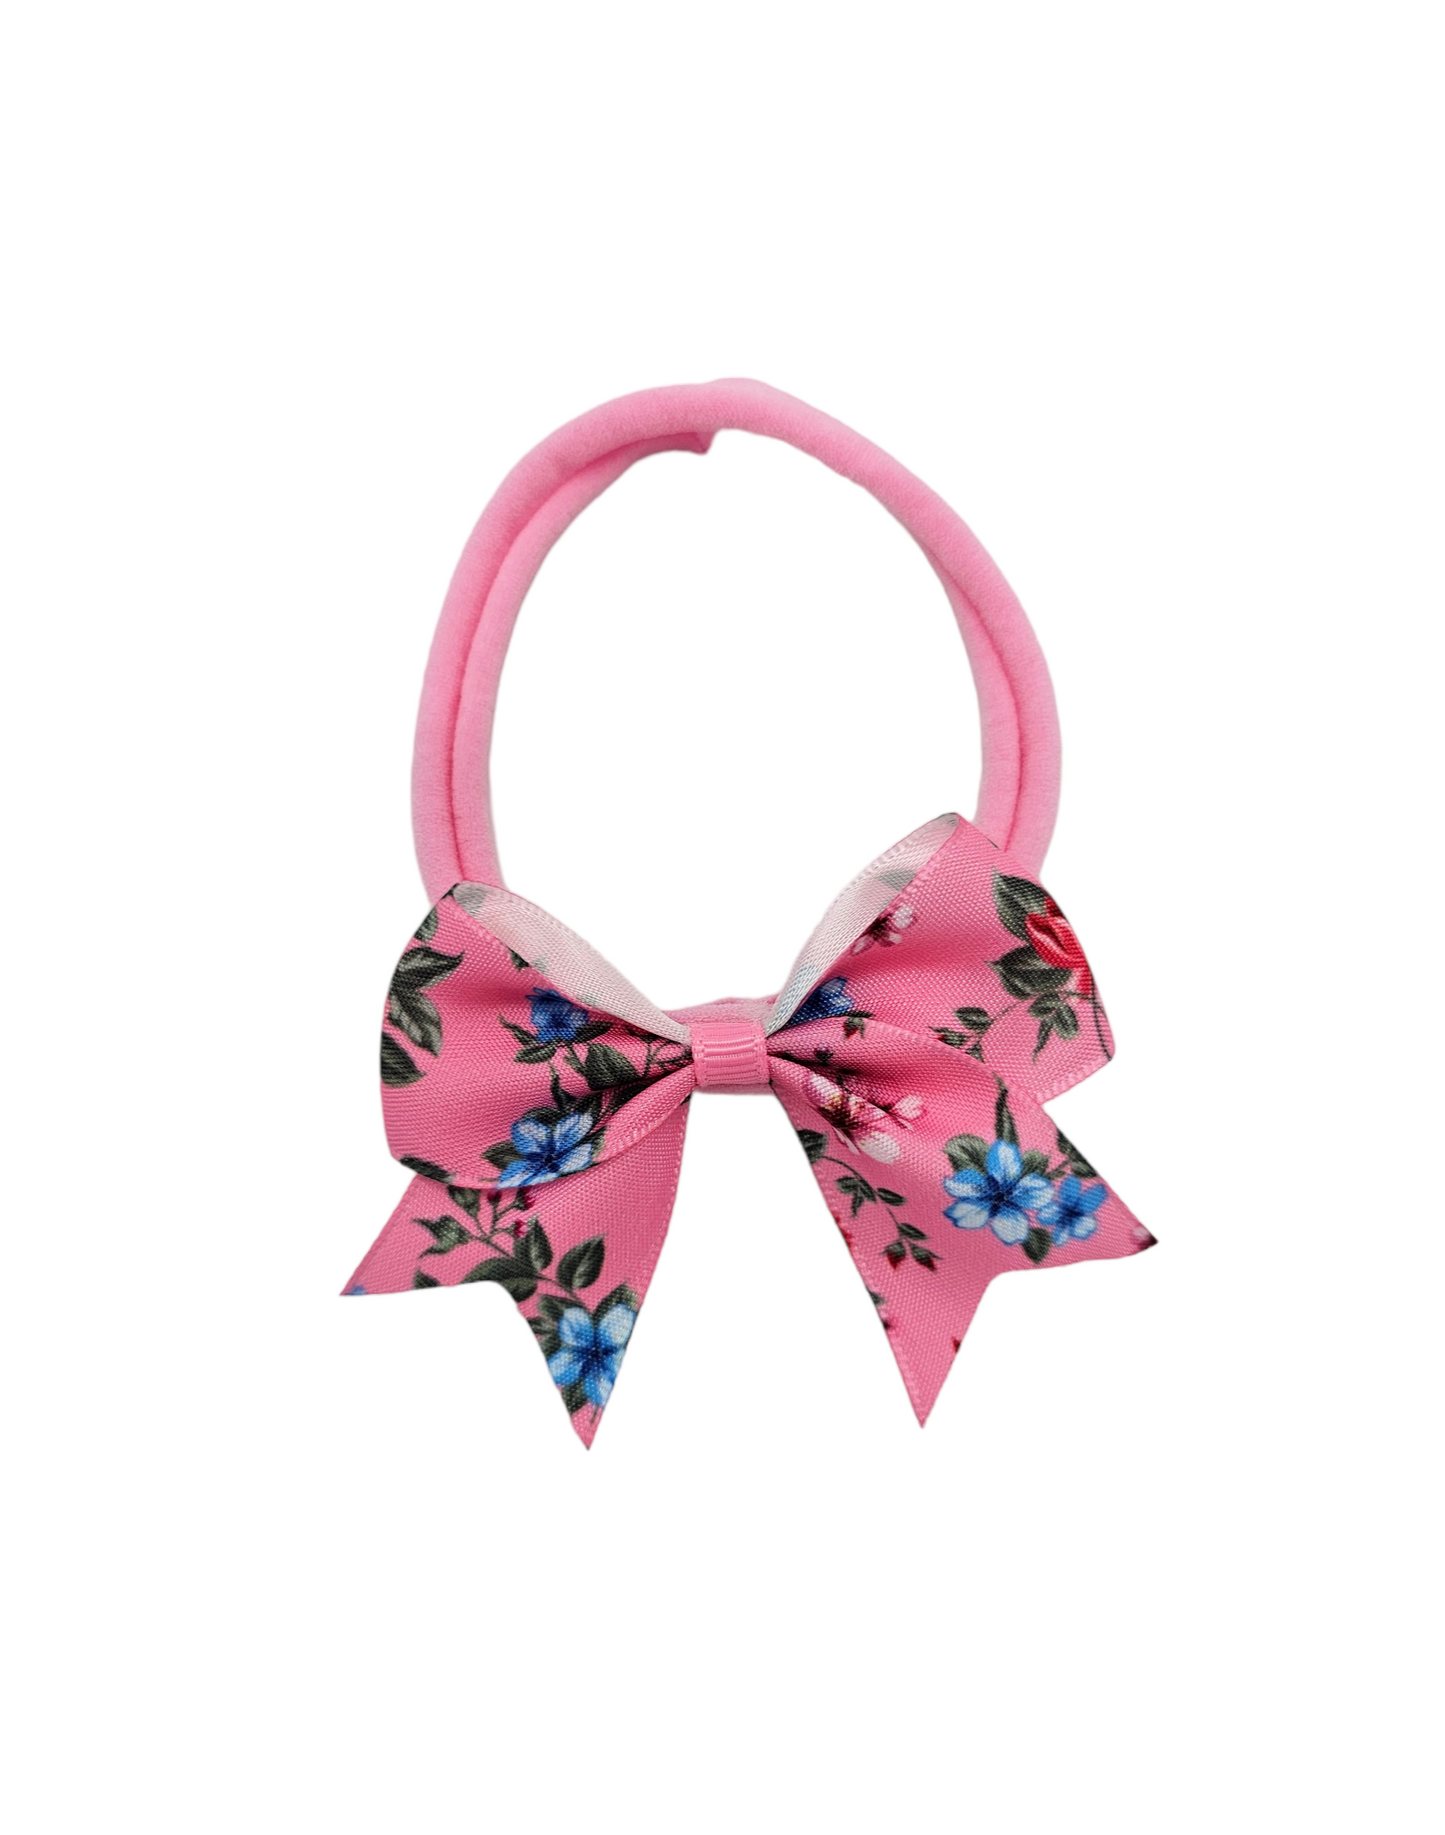 2.5 Inch Candy Pink Floral Kiss Dainty Bow on Headband - Betty Brown Boutique Ltd